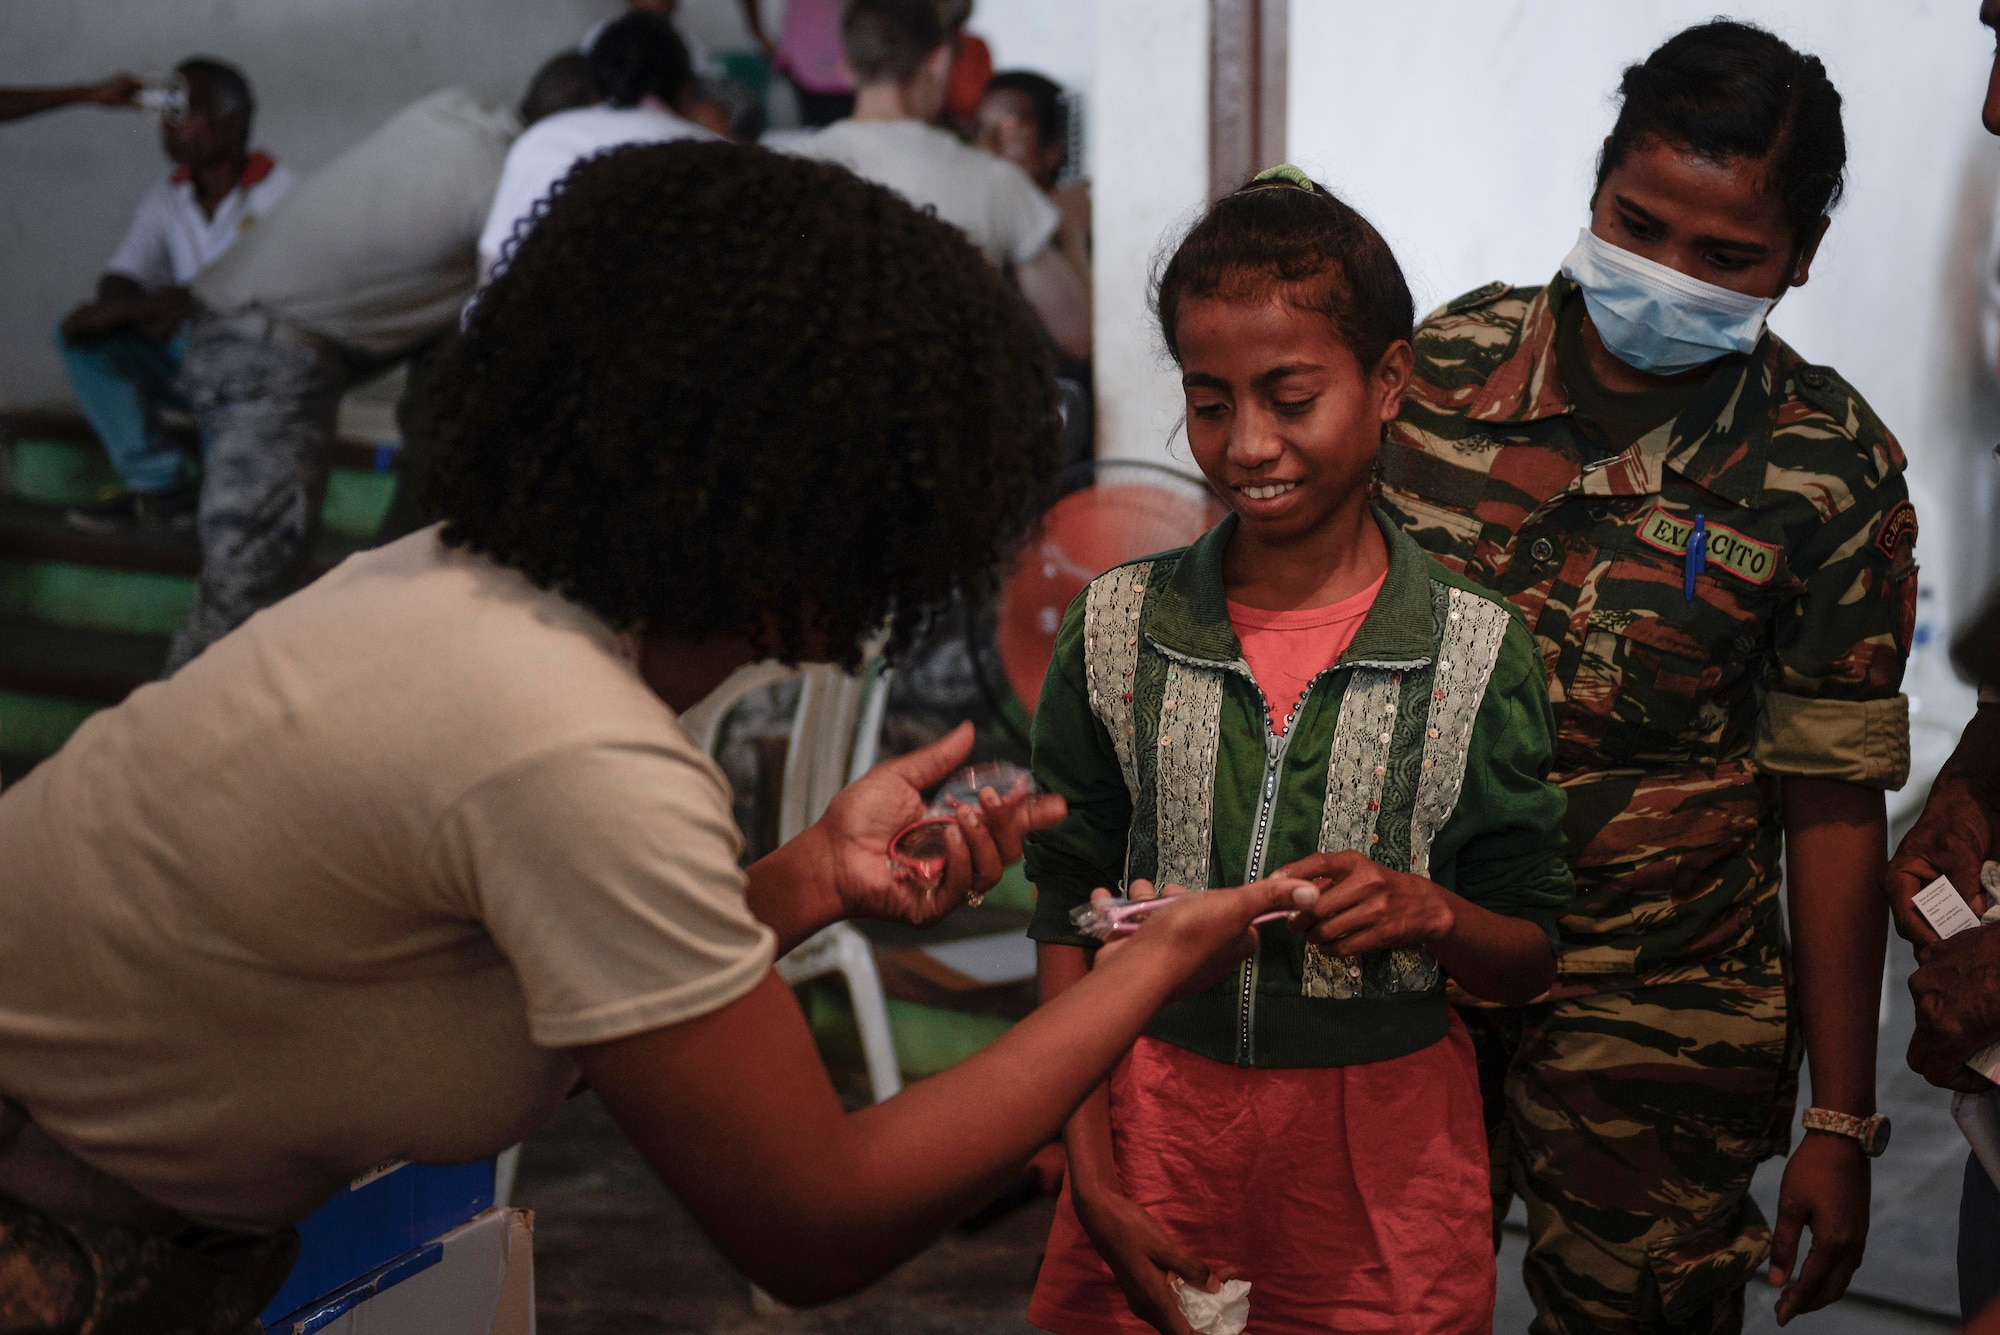 U.S. Air Force Staff Sgt. Latrisha Skinner (left), 35th Aerospace Medicine Squadron optometry technician, offers a choice of sunglasses to a young patient following her optometry examination during an Operation Pacific Angel 15-2 health services outreach event Sept. 7, 2015, in Baucau, Timor-Leste. Pacific Angel is a multilateral humanitarian assistance civil military operation, which improves military-to-military partnerships in the Pacific while also providing medical health outreach, civic engineering projects and subject matter exchanges among partner forces. (U.S. Air Force photo by Staff Sgt. Alexander W. Riedel/Released)